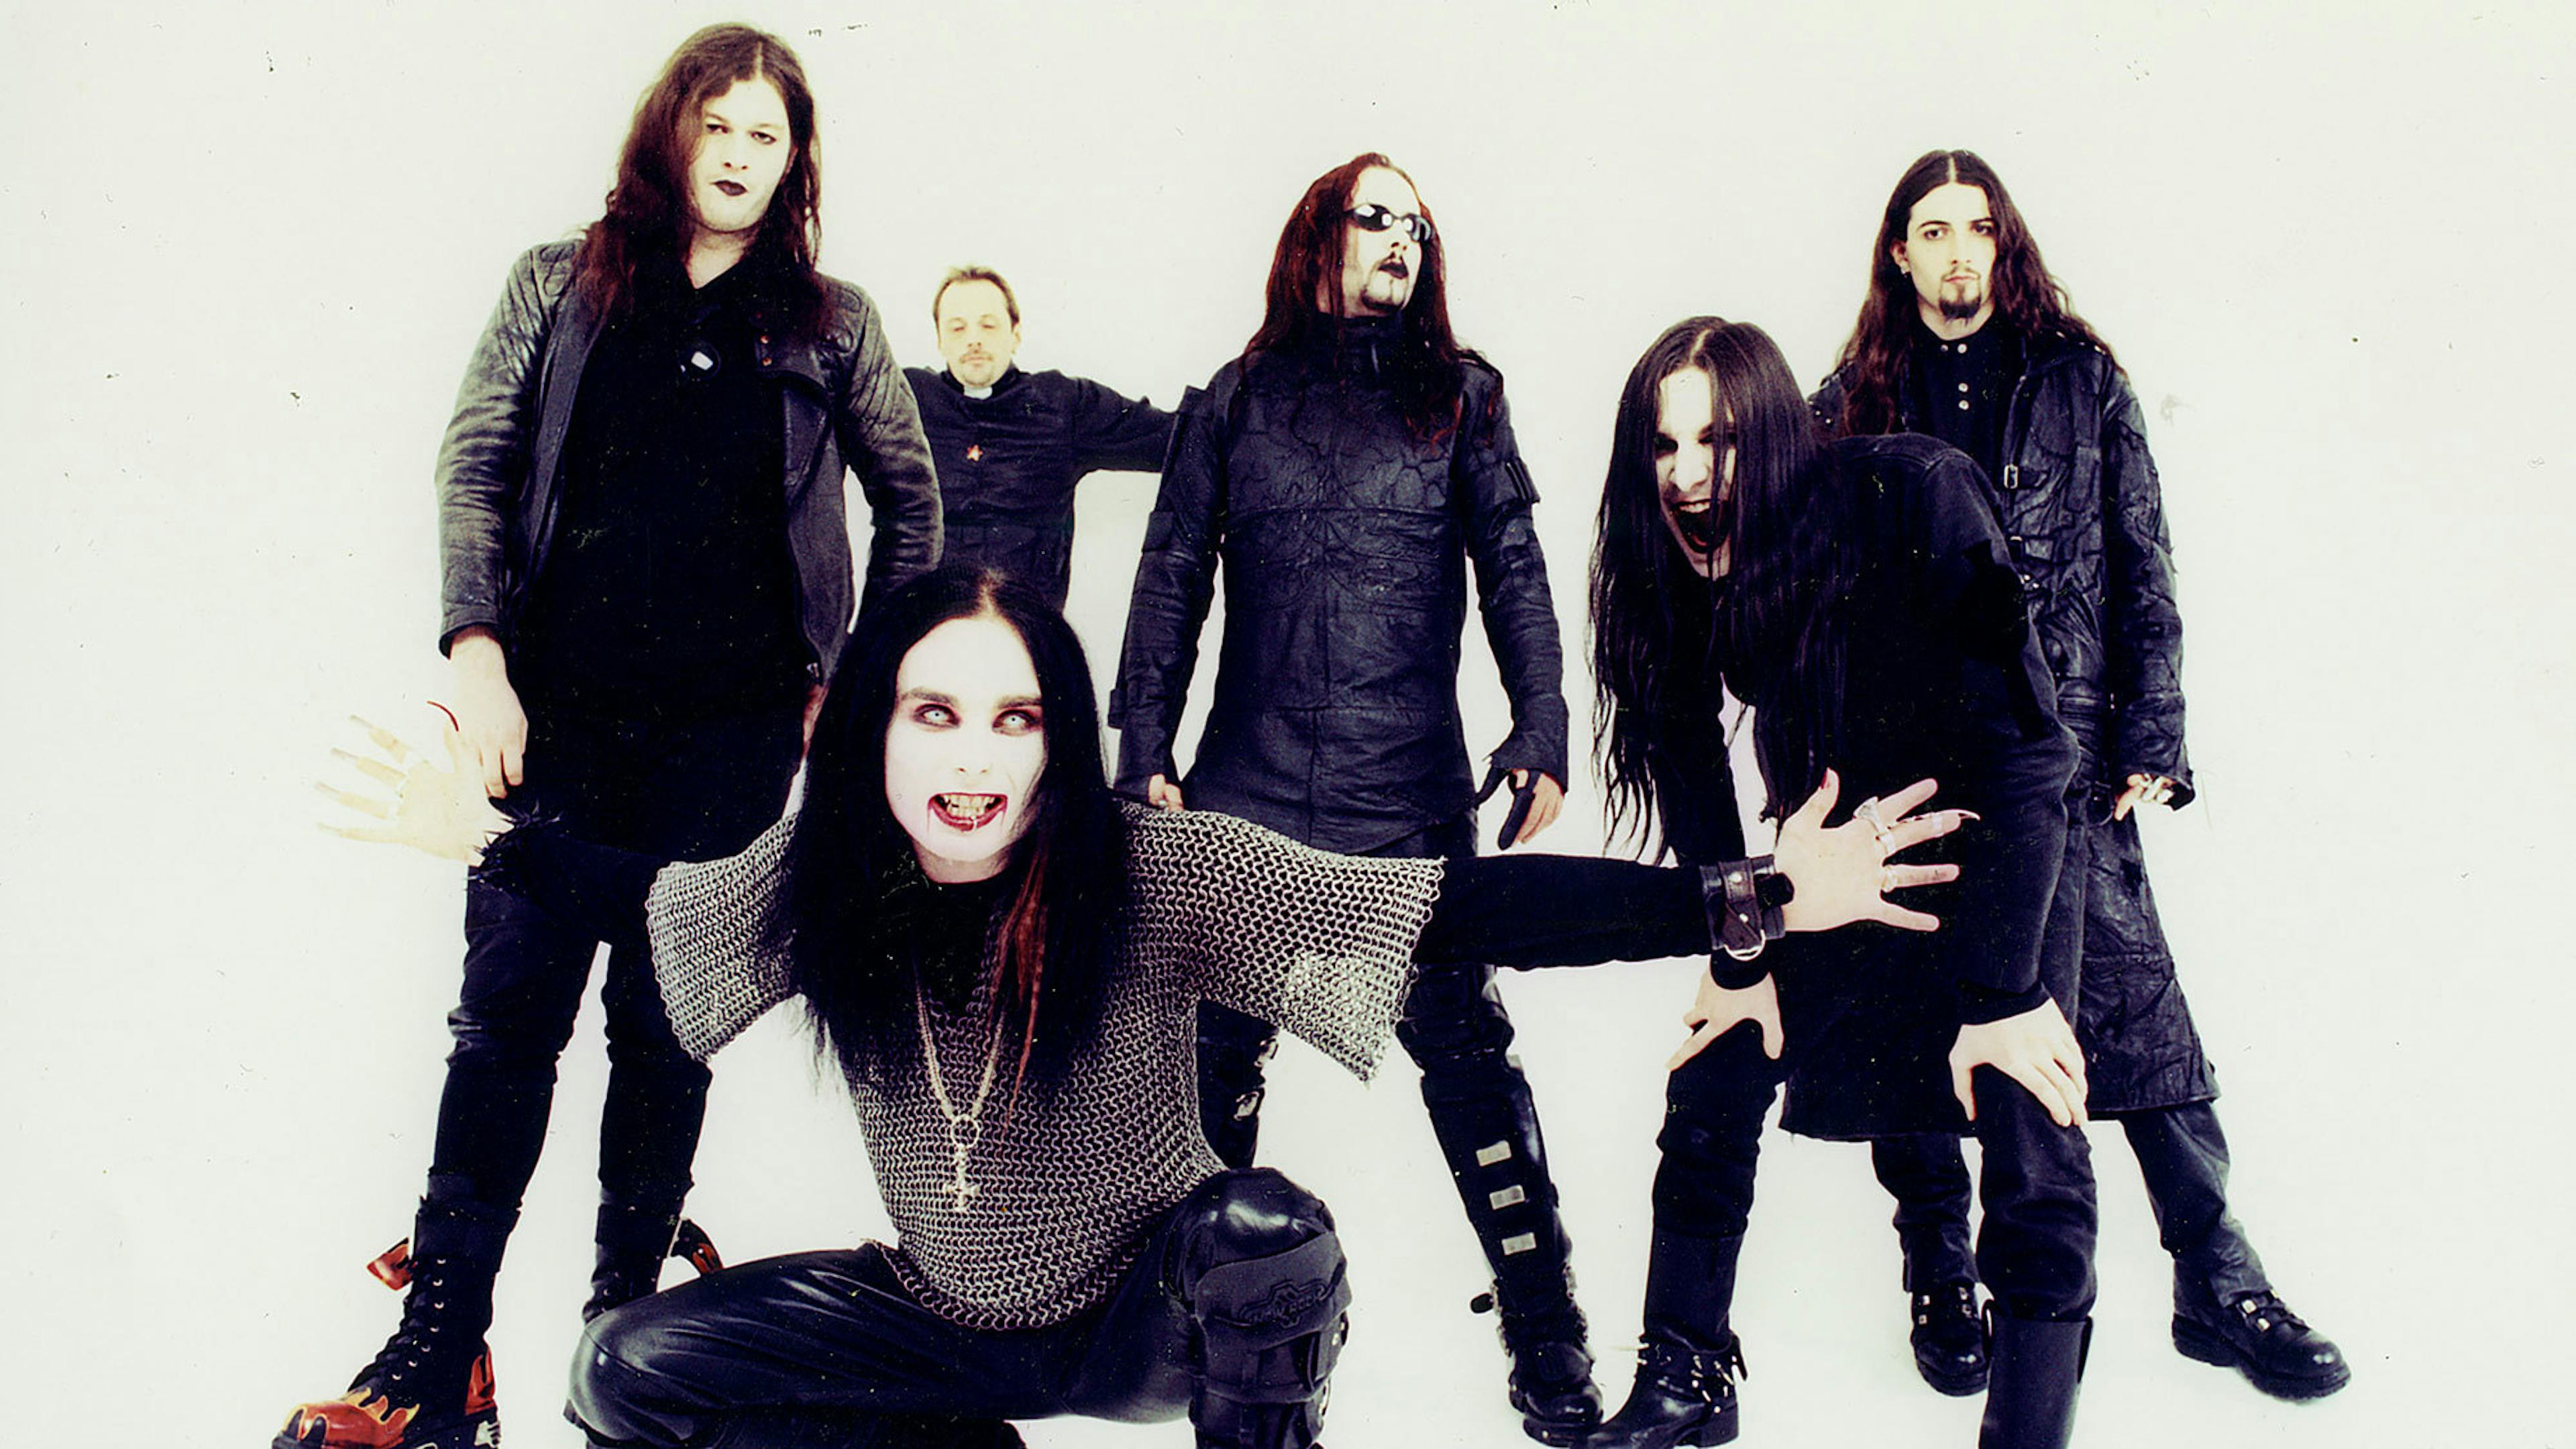 Remembering the Cradle Of Filth ‘Jesus Is A C**t’ T-shirt controversy